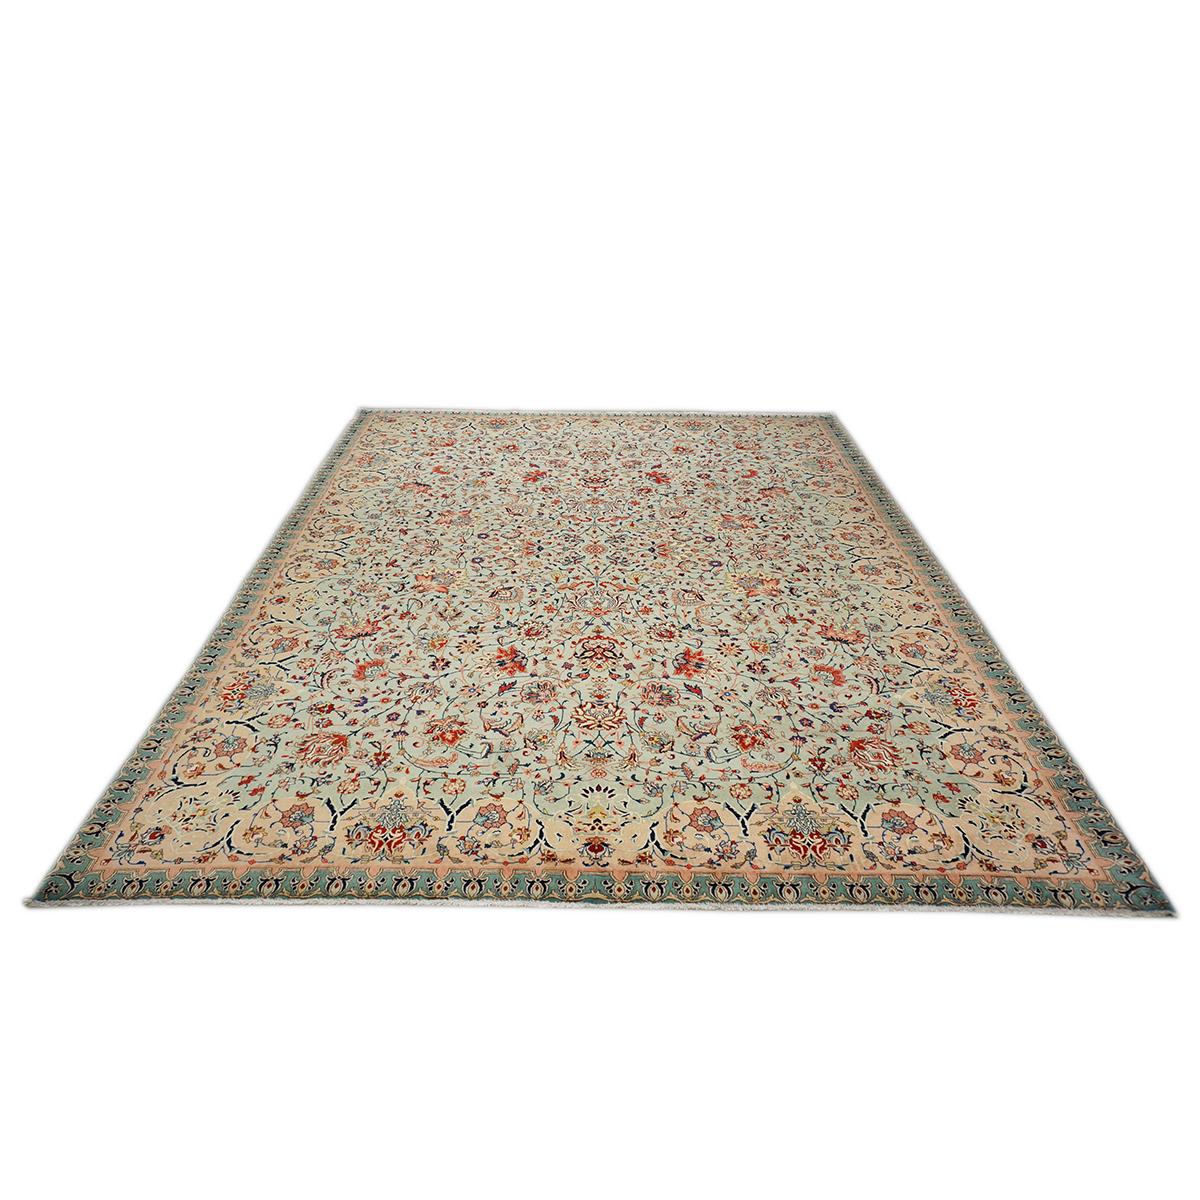 Ashly Fine Rugs presents a Persian Tabriz Emad circa 1930-40, handwoven in Iran at the Emad workshop in Tabriz, one of the most sought-after carpets and well-known workshops. They were known to make rugs with this particular light blue and salmon